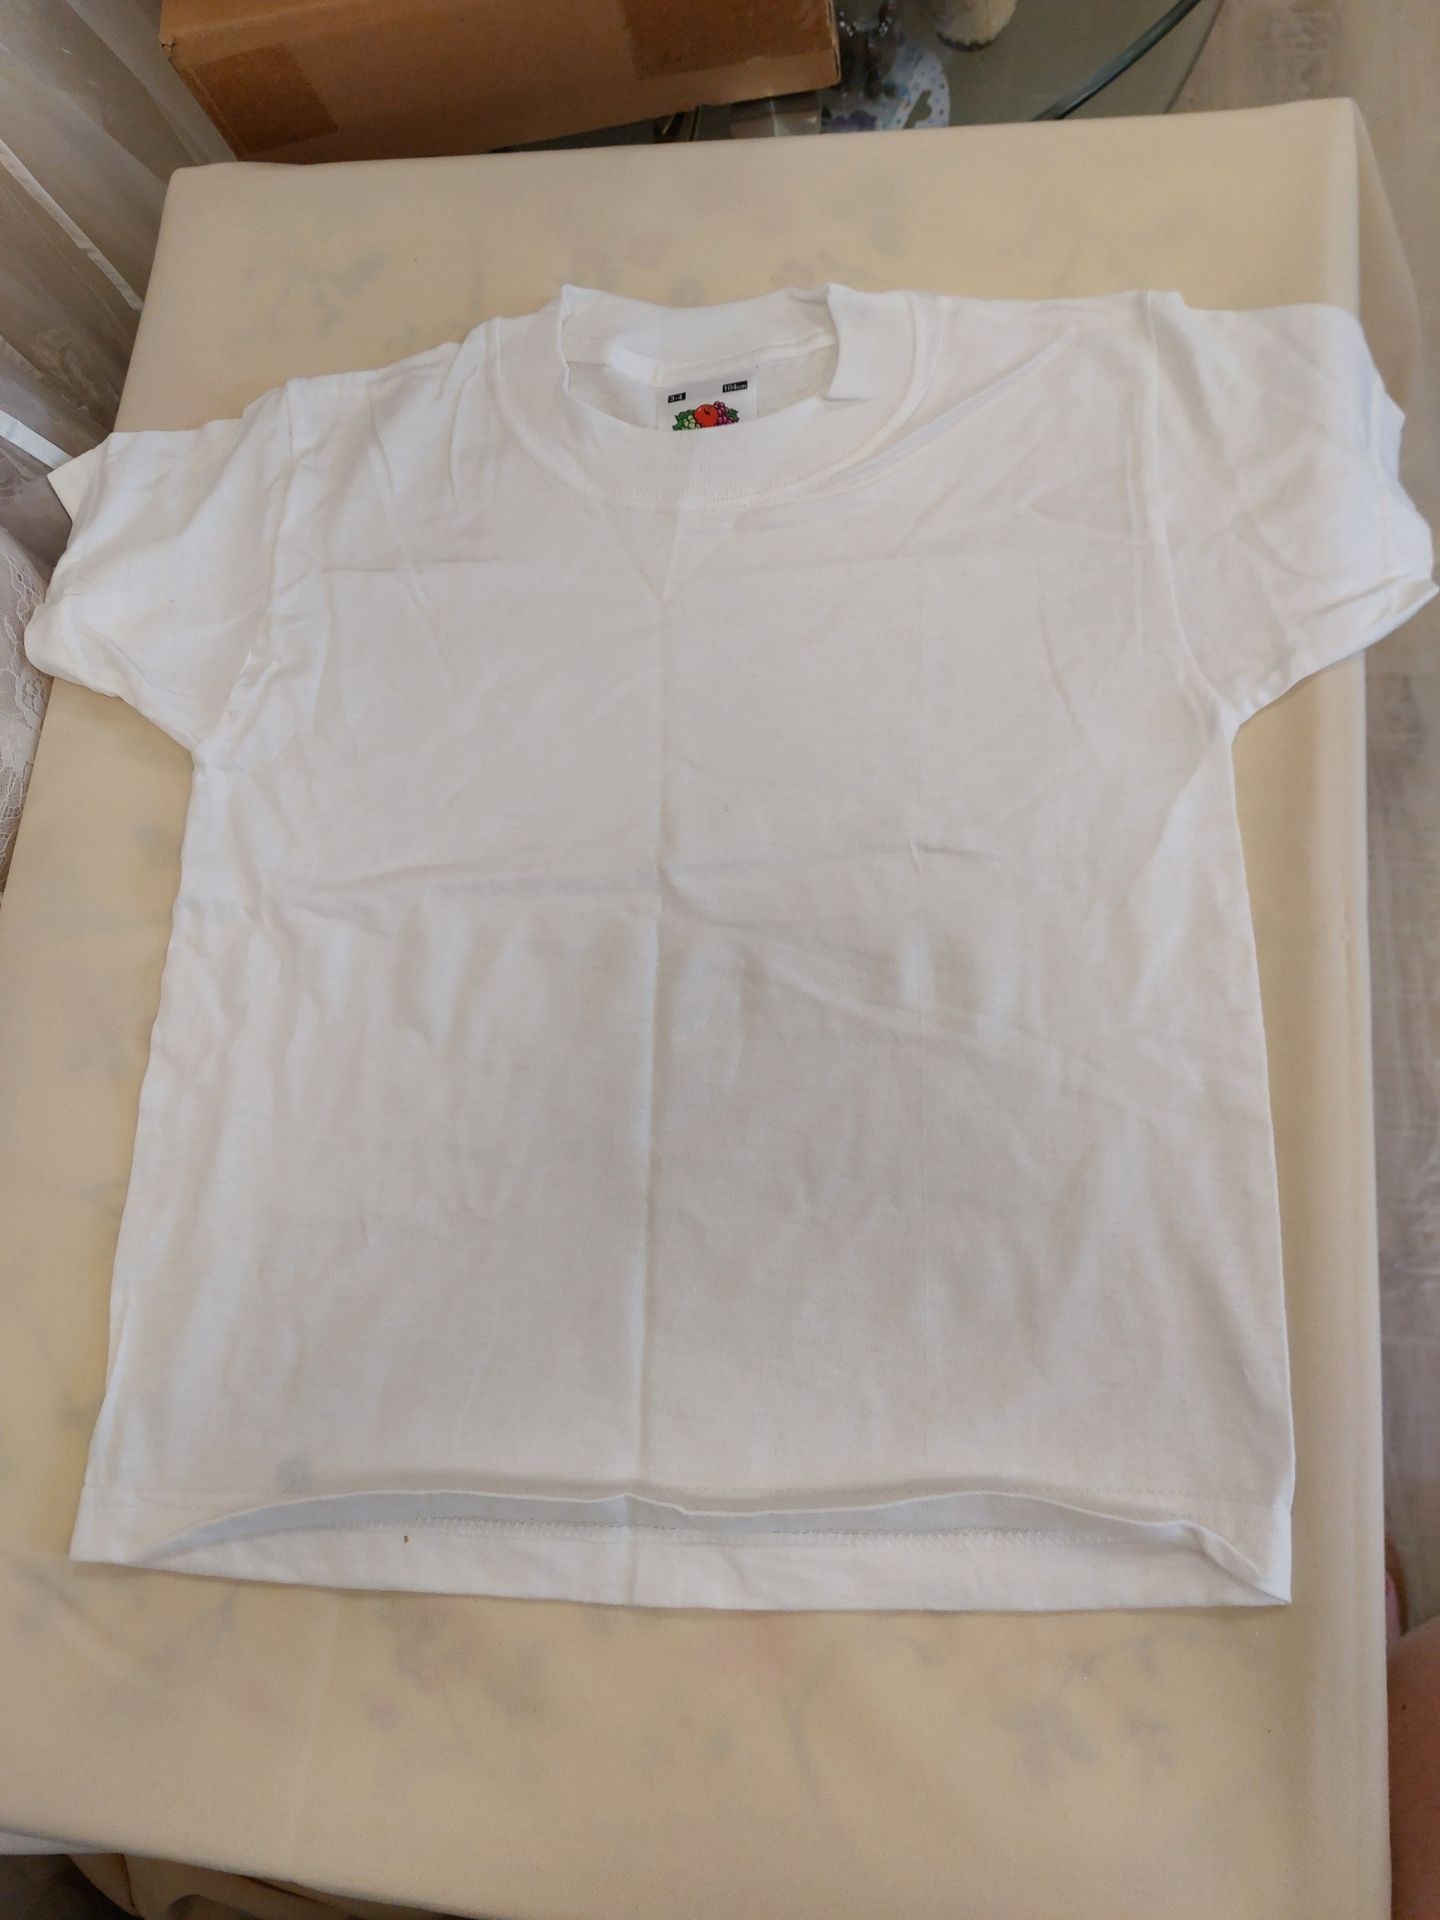 White Tee-Shirts Size 3 to 4. Pack of 6 - Image 2 of 3